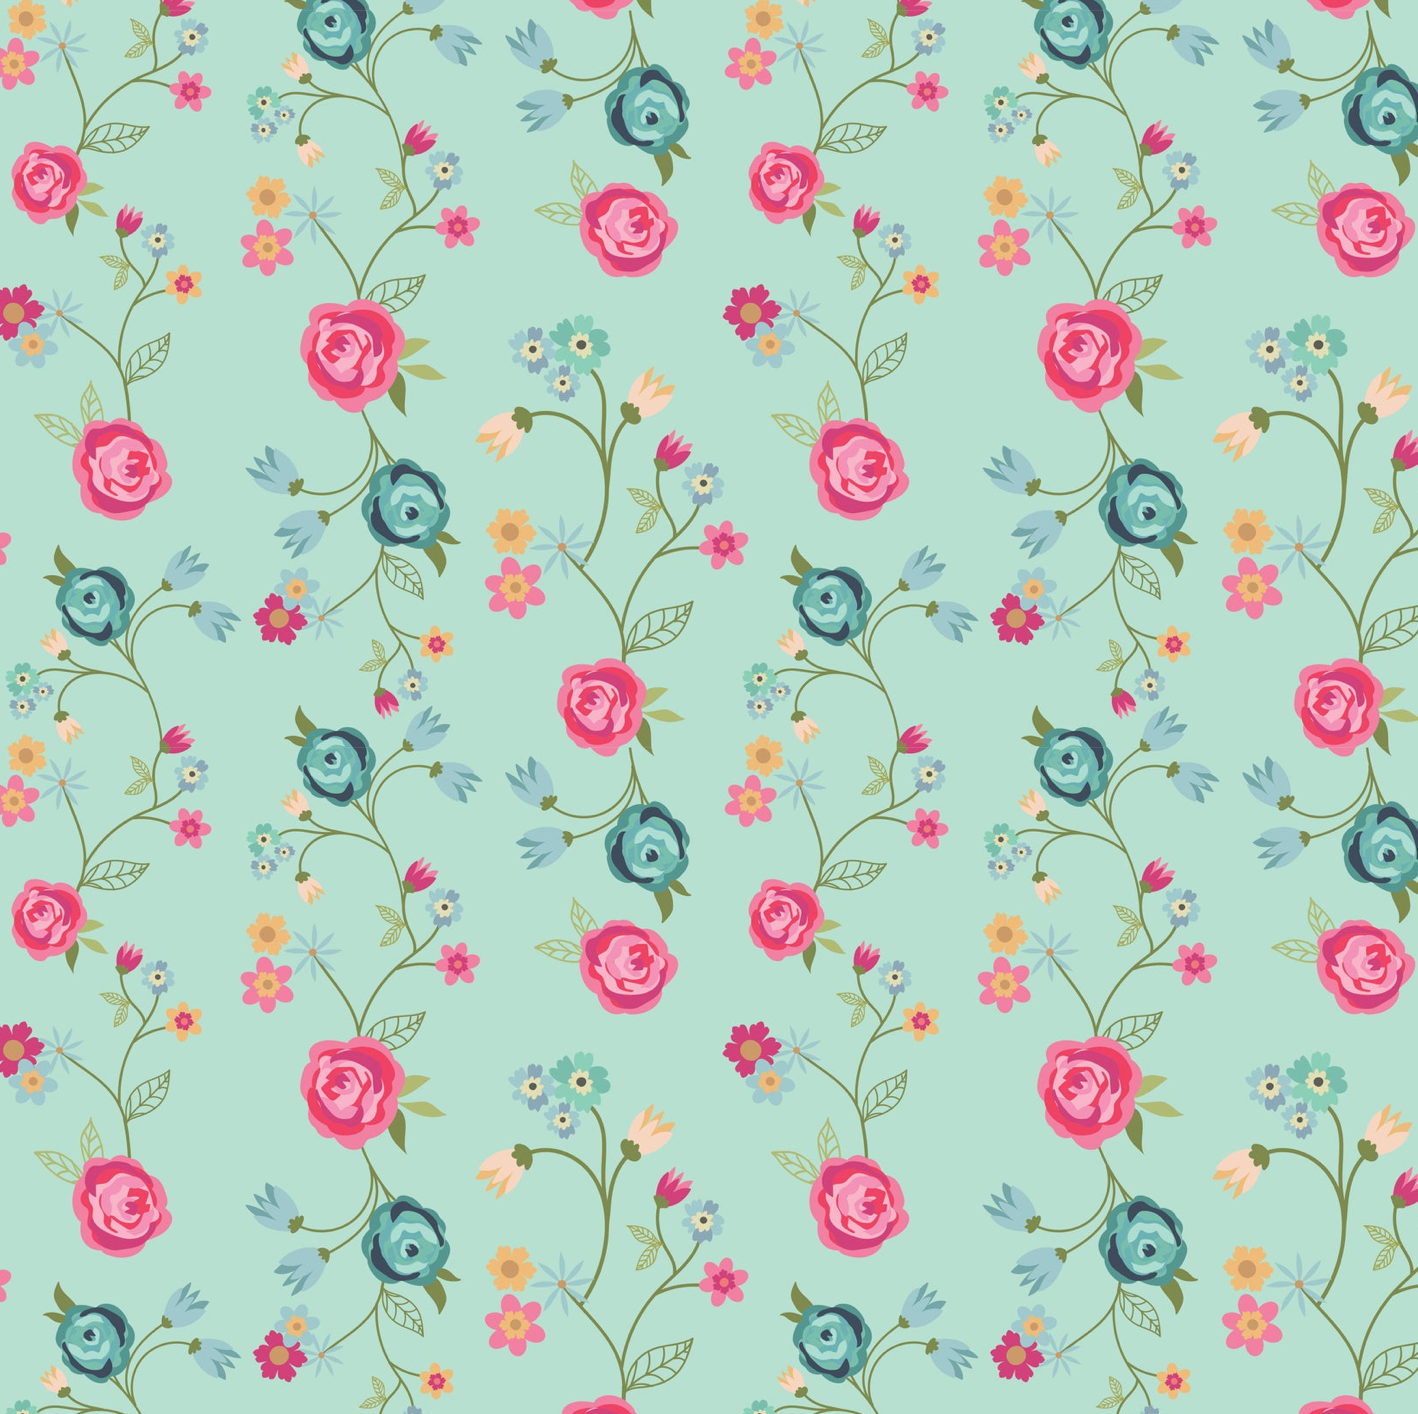 Calico Cowgirls, Floral & Vines Teal, CW24817, sold by 1/2 yard, *PREORDER